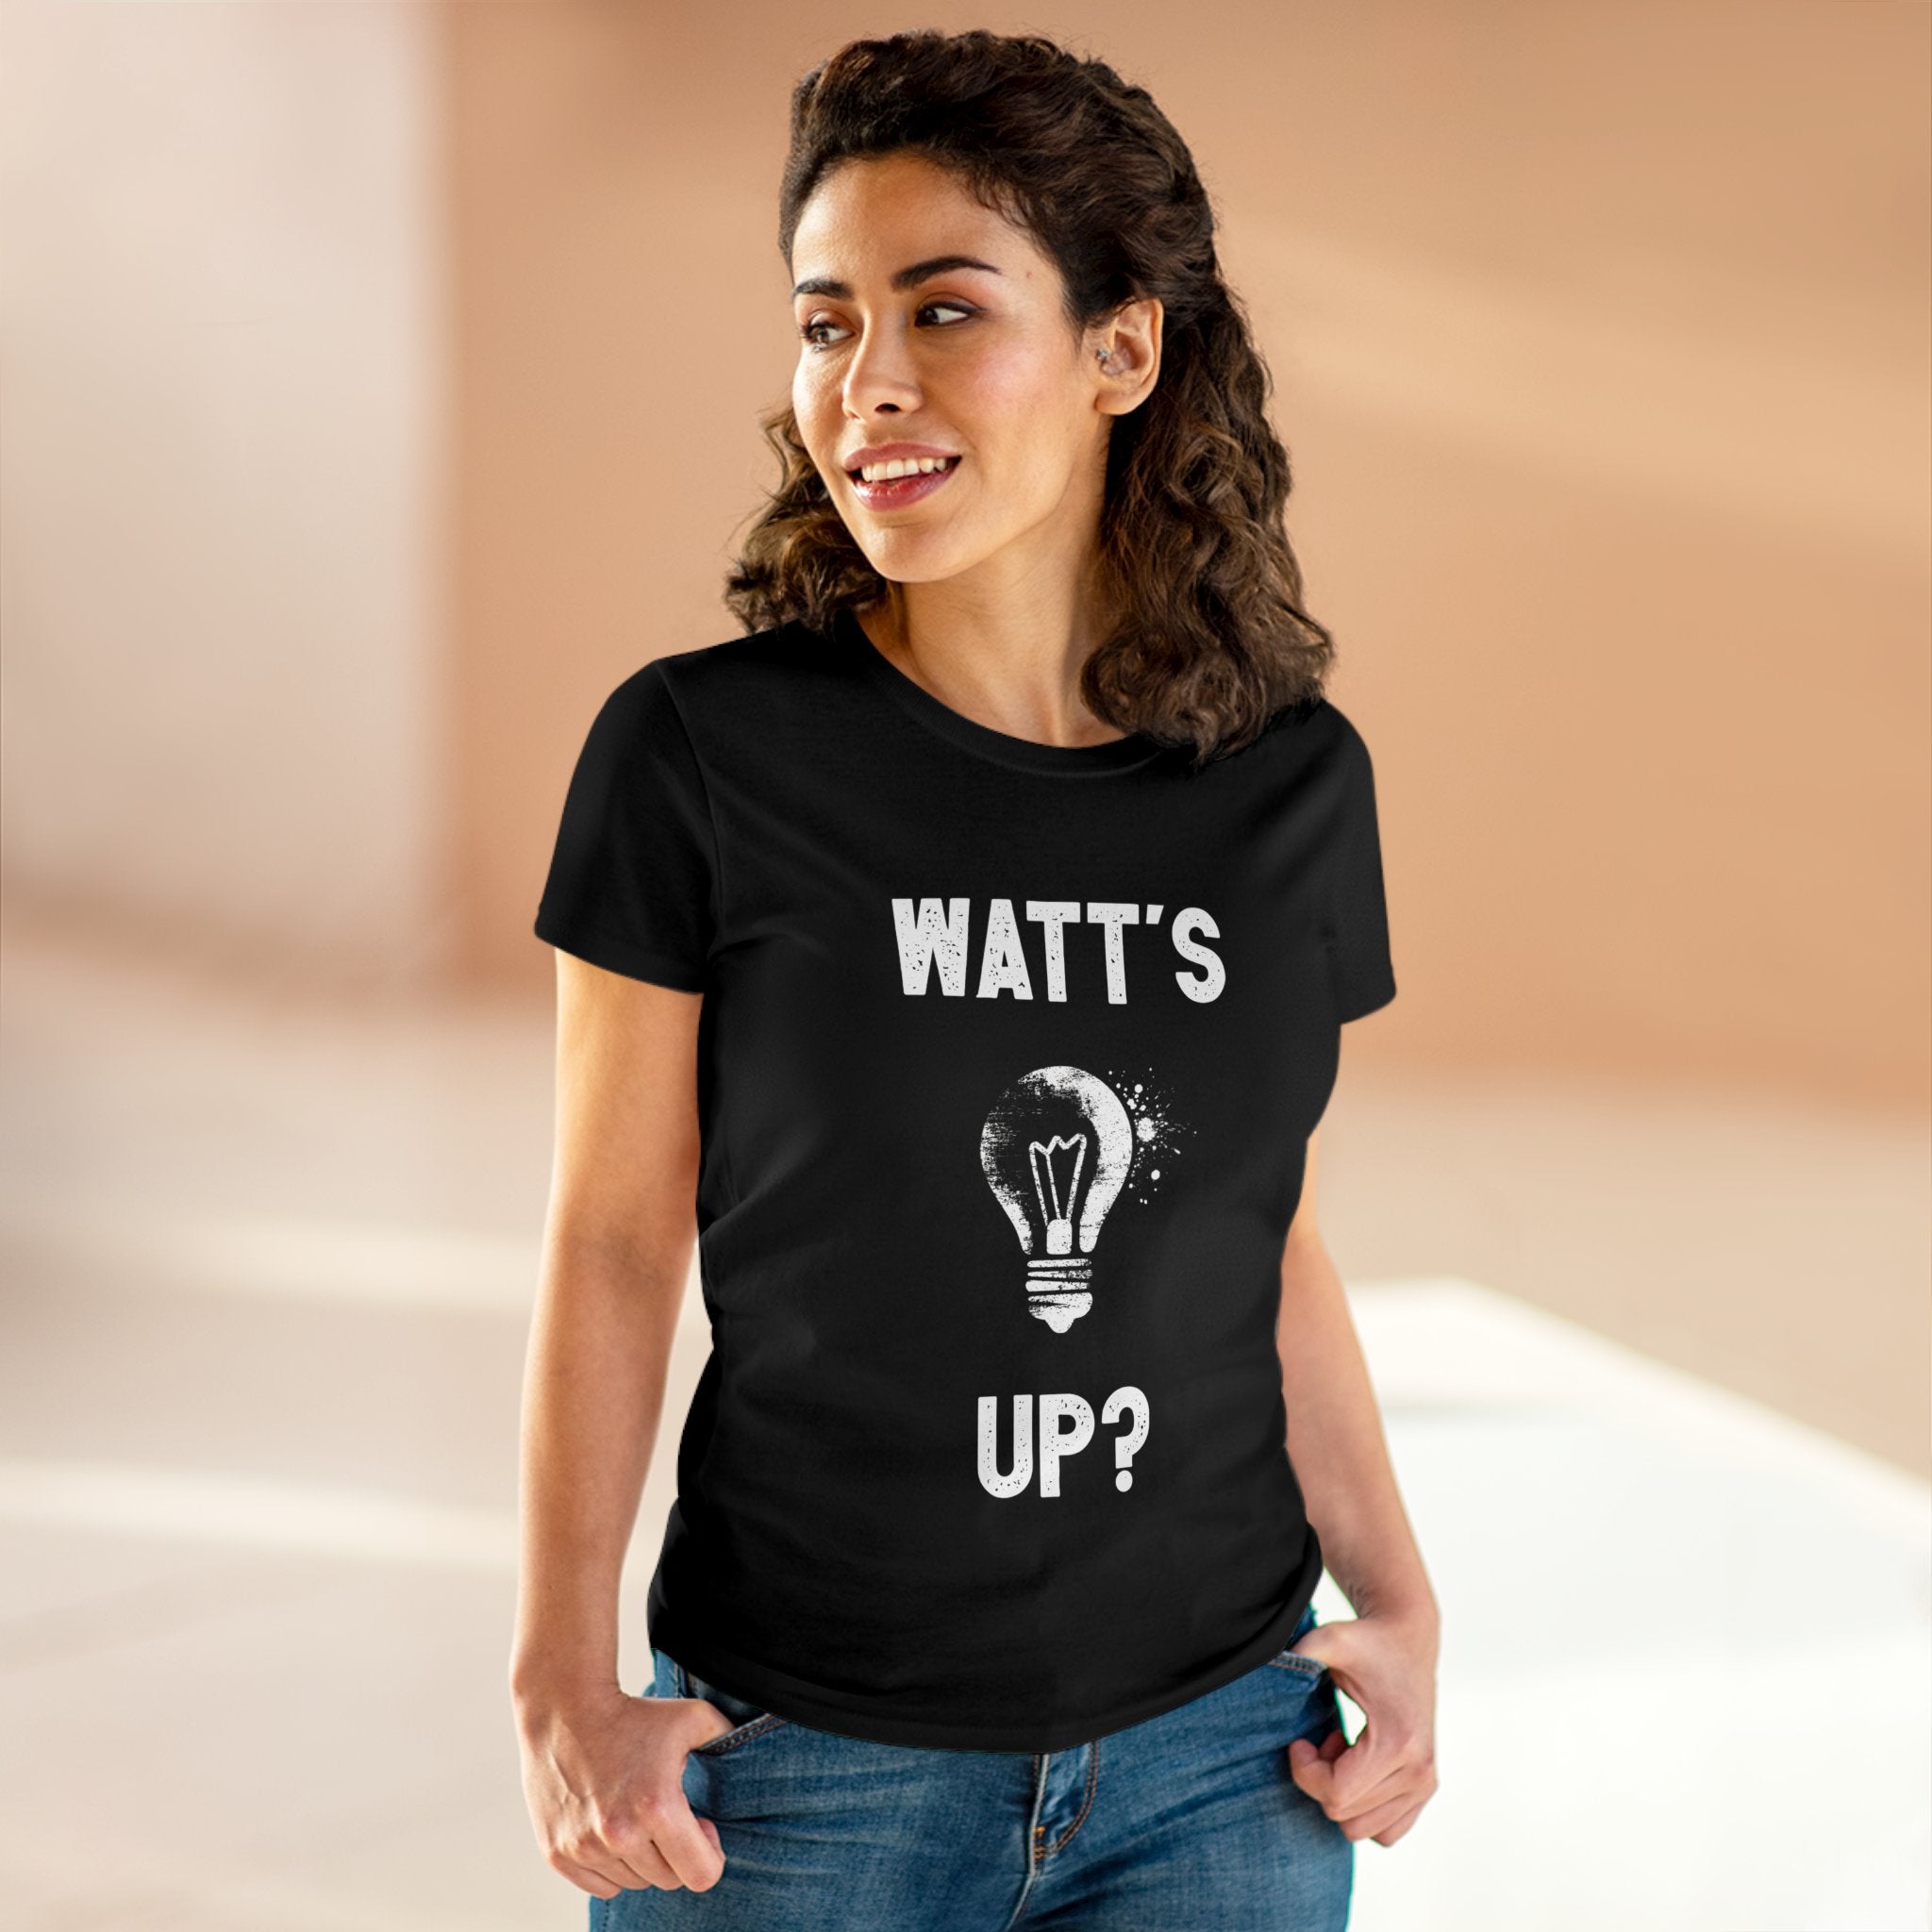 A woman wearing a black t-shirt that reads "Watt's Up?", featuring a light bulb graphic, is standing in a well-lit indoor space. She is smiling and has her hands in her pockets, enjoying the comfort of the light cotton fabric Watts Up - Women's Tee, which is also pre-shrunk for a perfect fit.